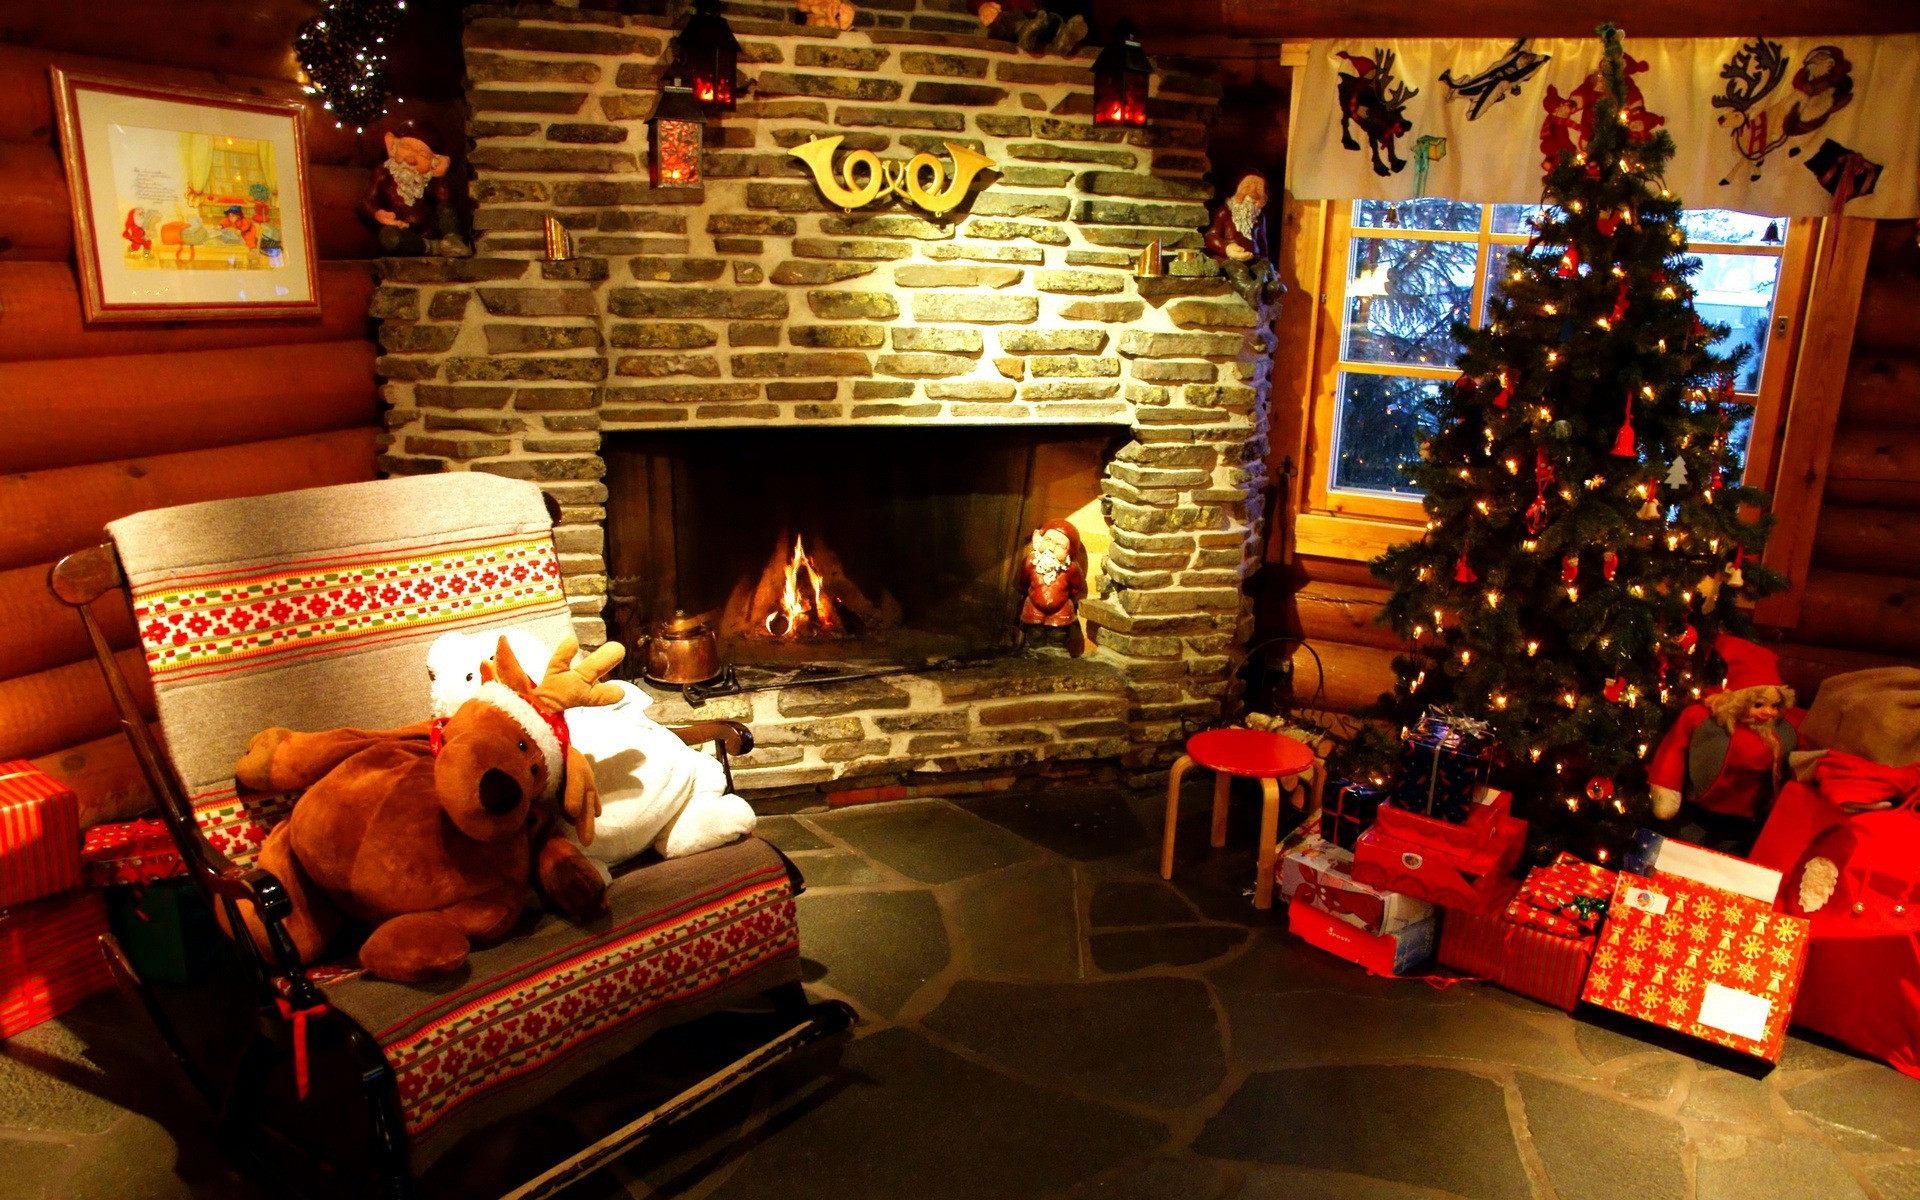 Christmas Tree Near Fireplace
 The Warmth Christmas on Pinterest